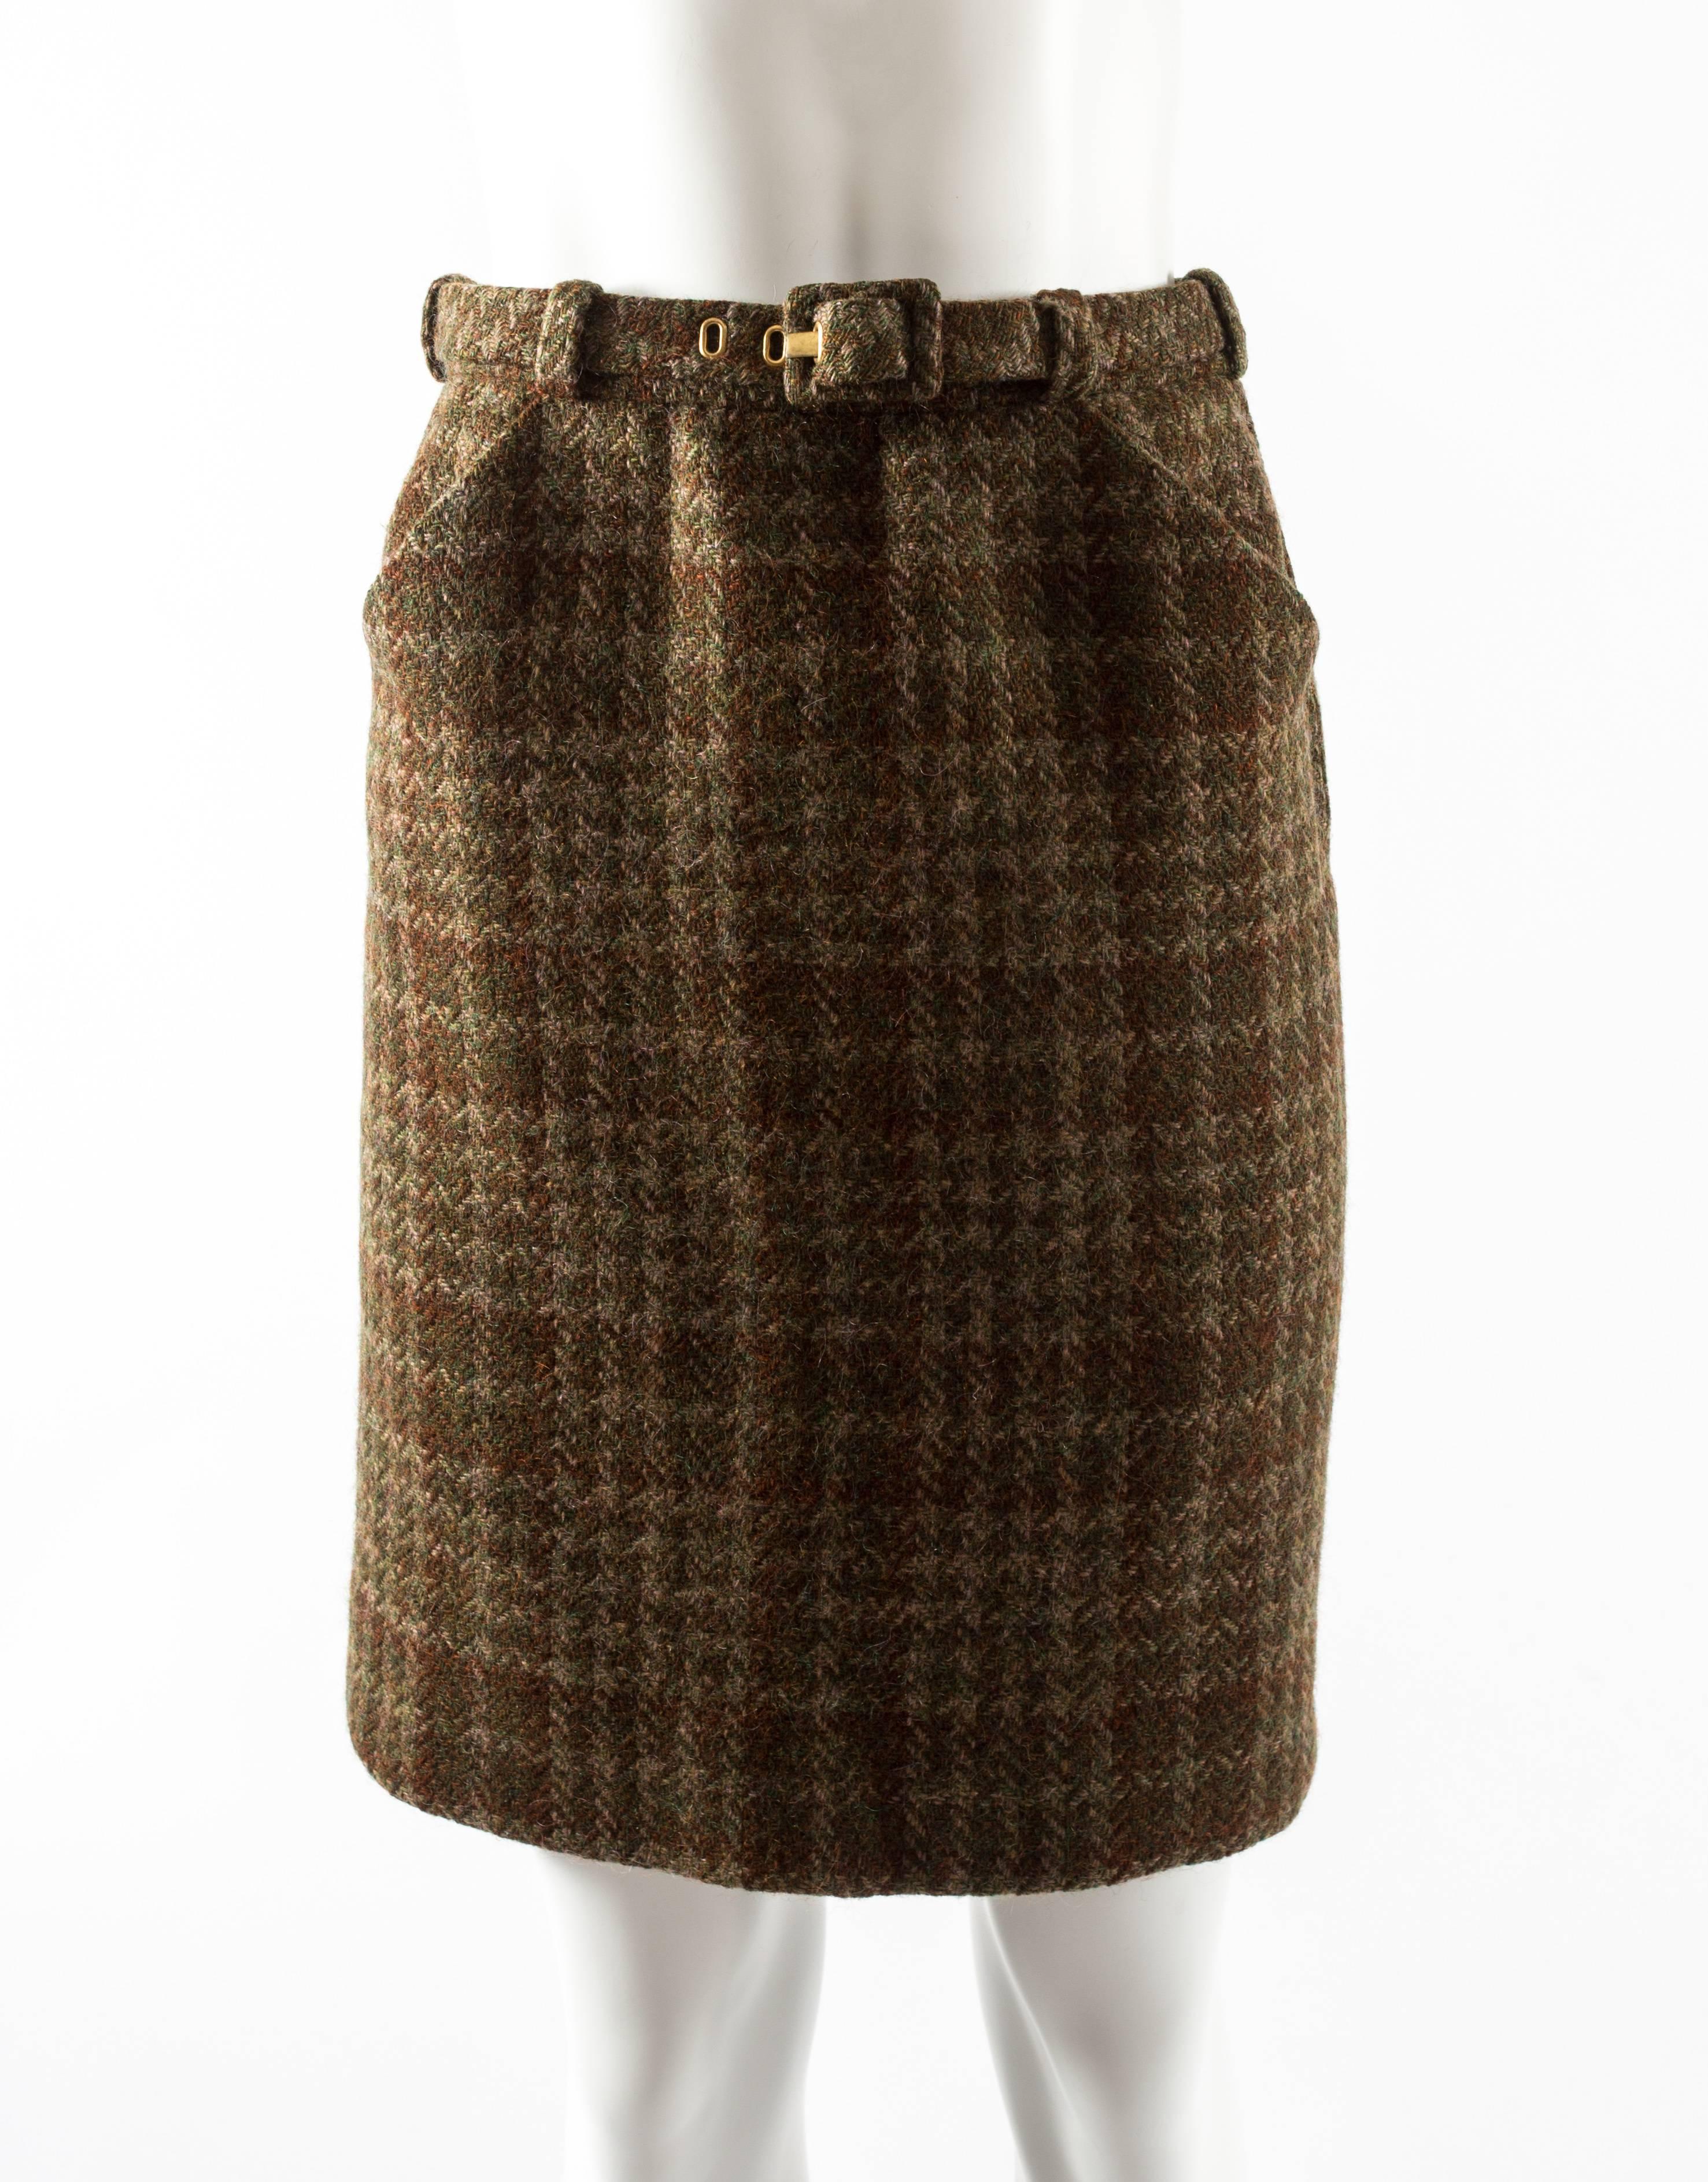 Jeanne Lanvin haute couture green tartan tweed coat and skirt set, c. 1940s In Excellent Condition For Sale In London, GB